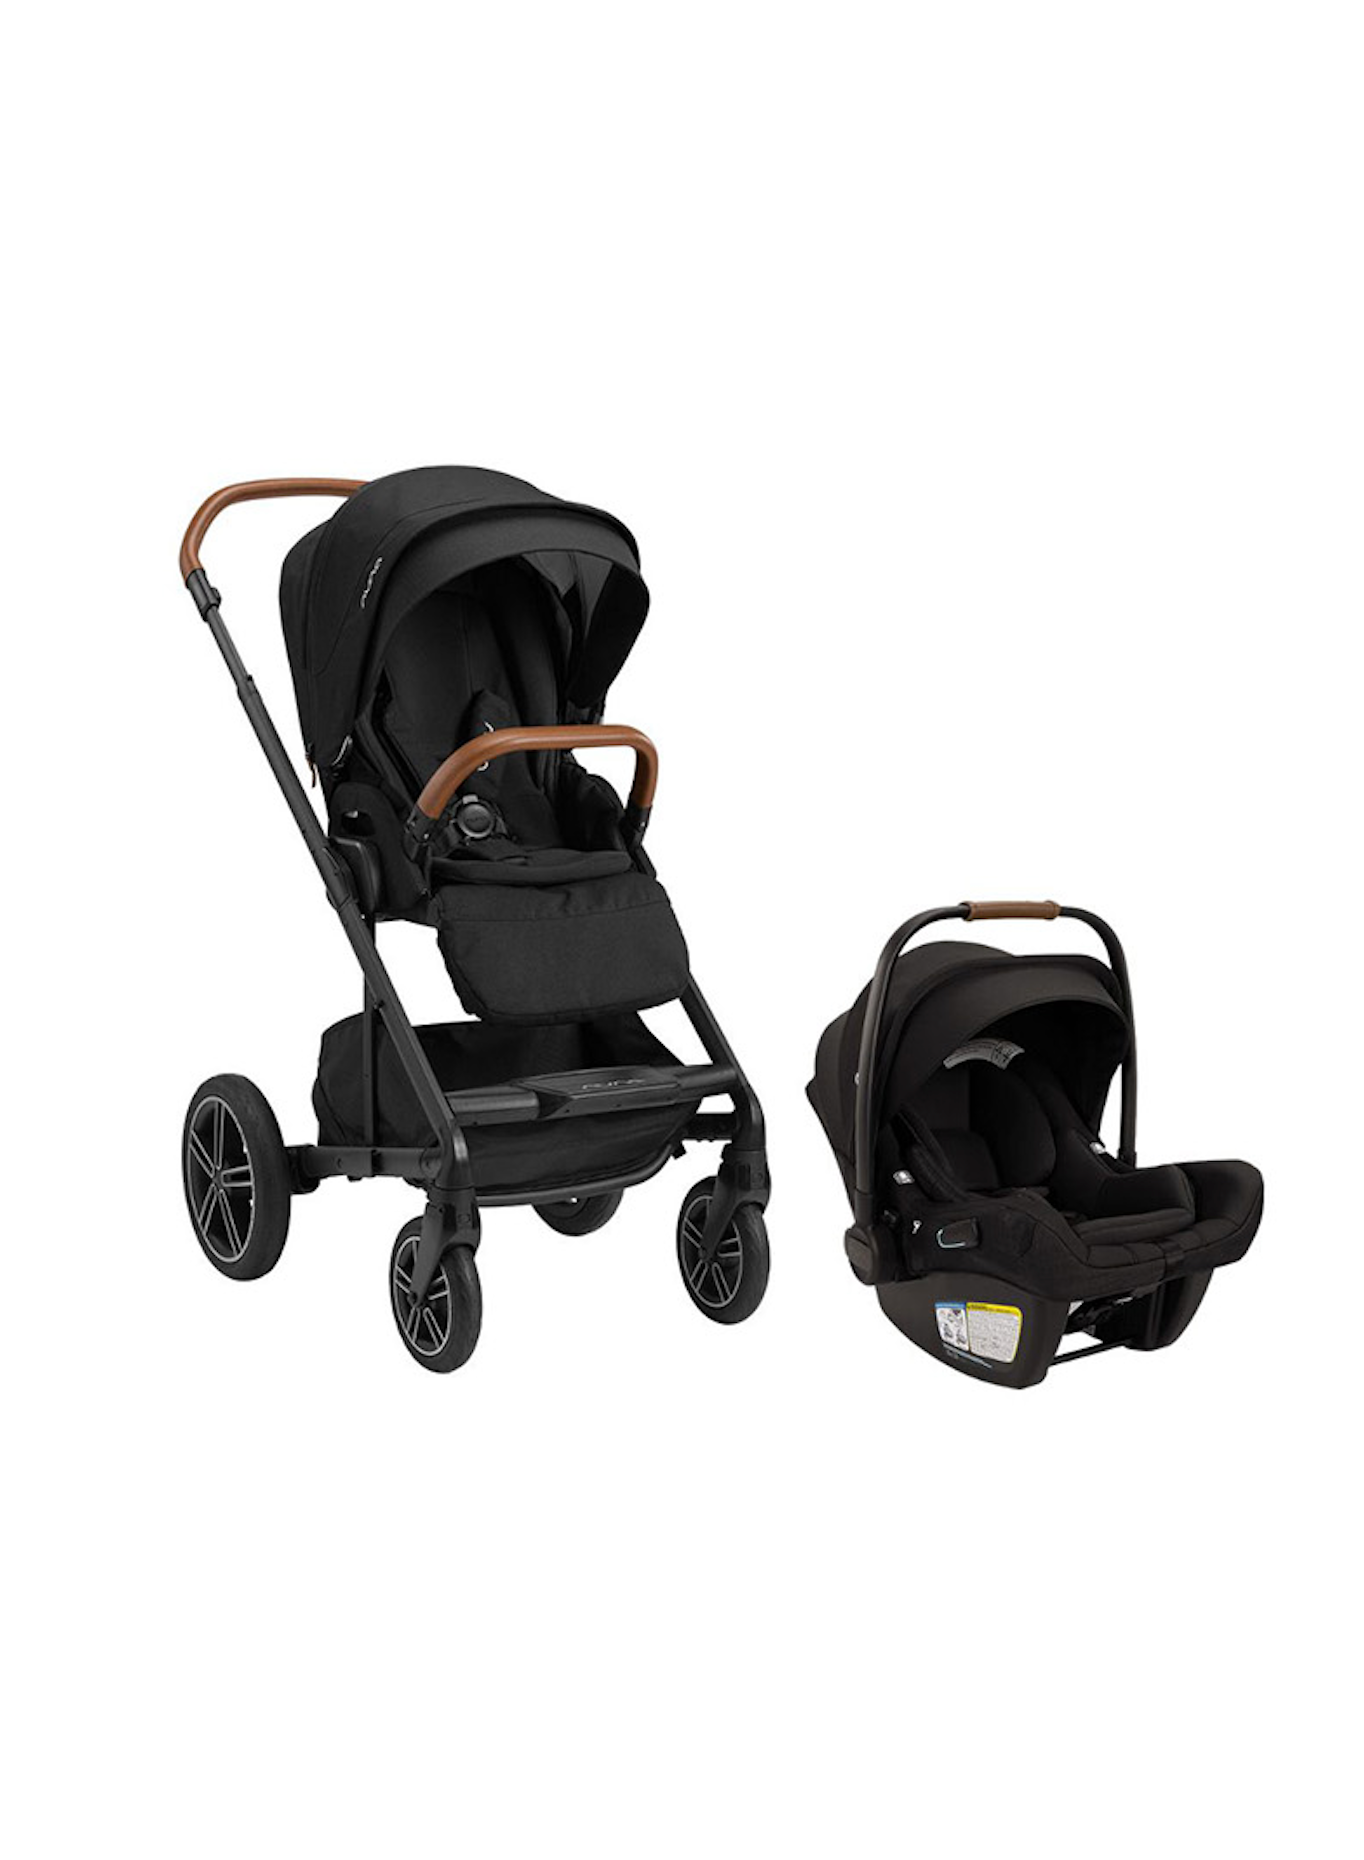 matching stroller and carseat set